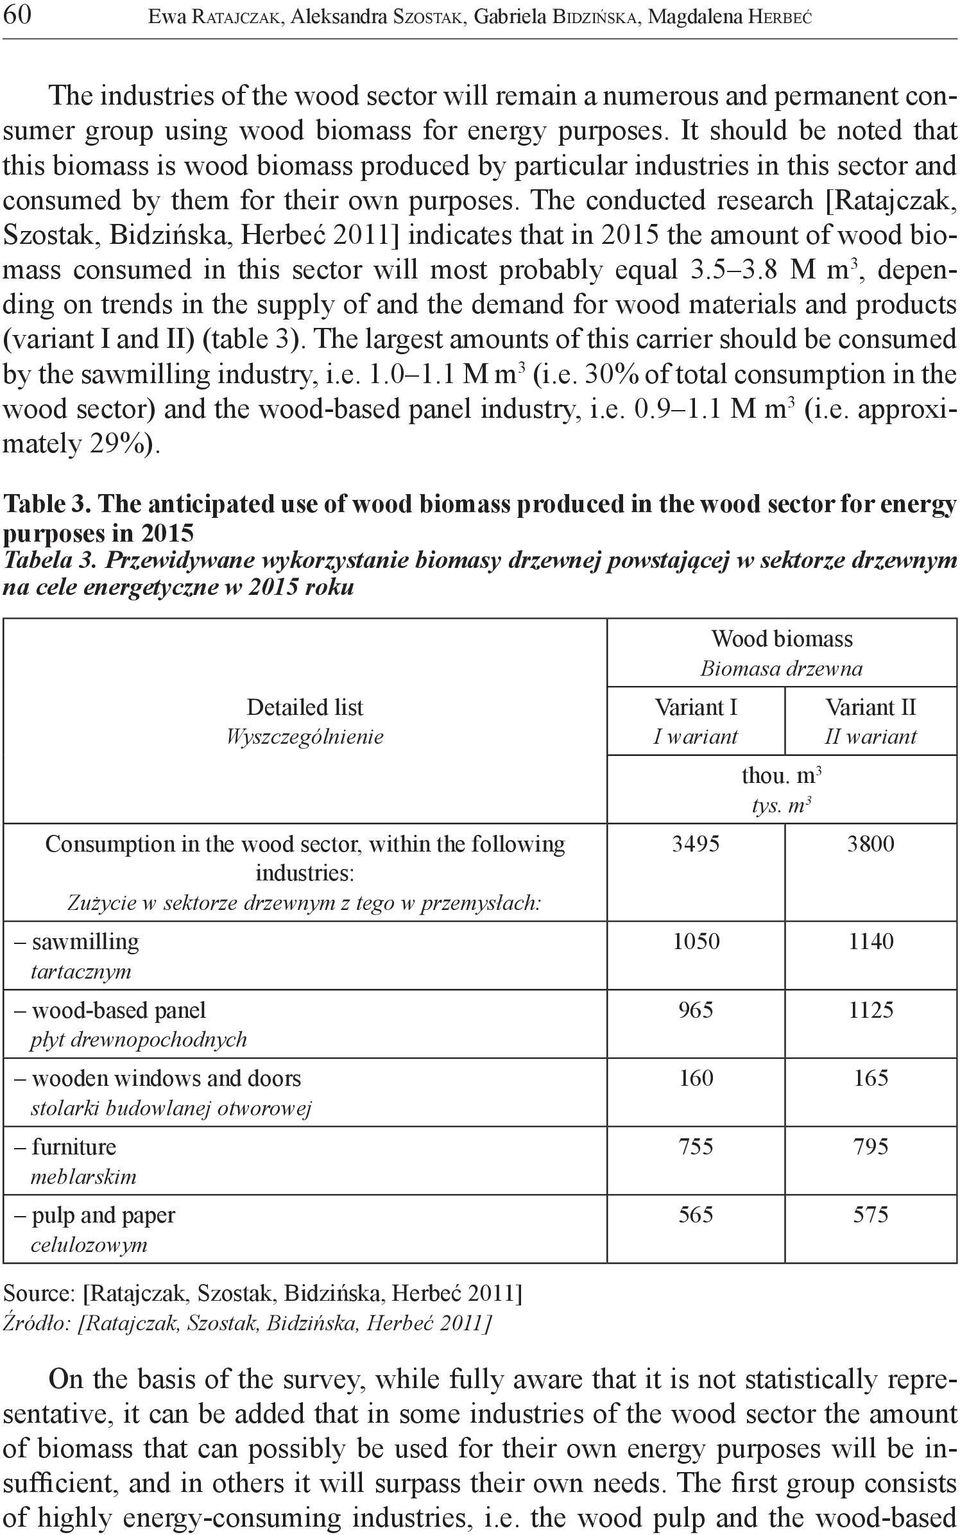 The conducted research [Ratajczak, Szostak, Bidzińska, Herbeć 2011] indicates that in 2015 the amount of wood biomass consumed in this sector will most probably equal 3.5 3.